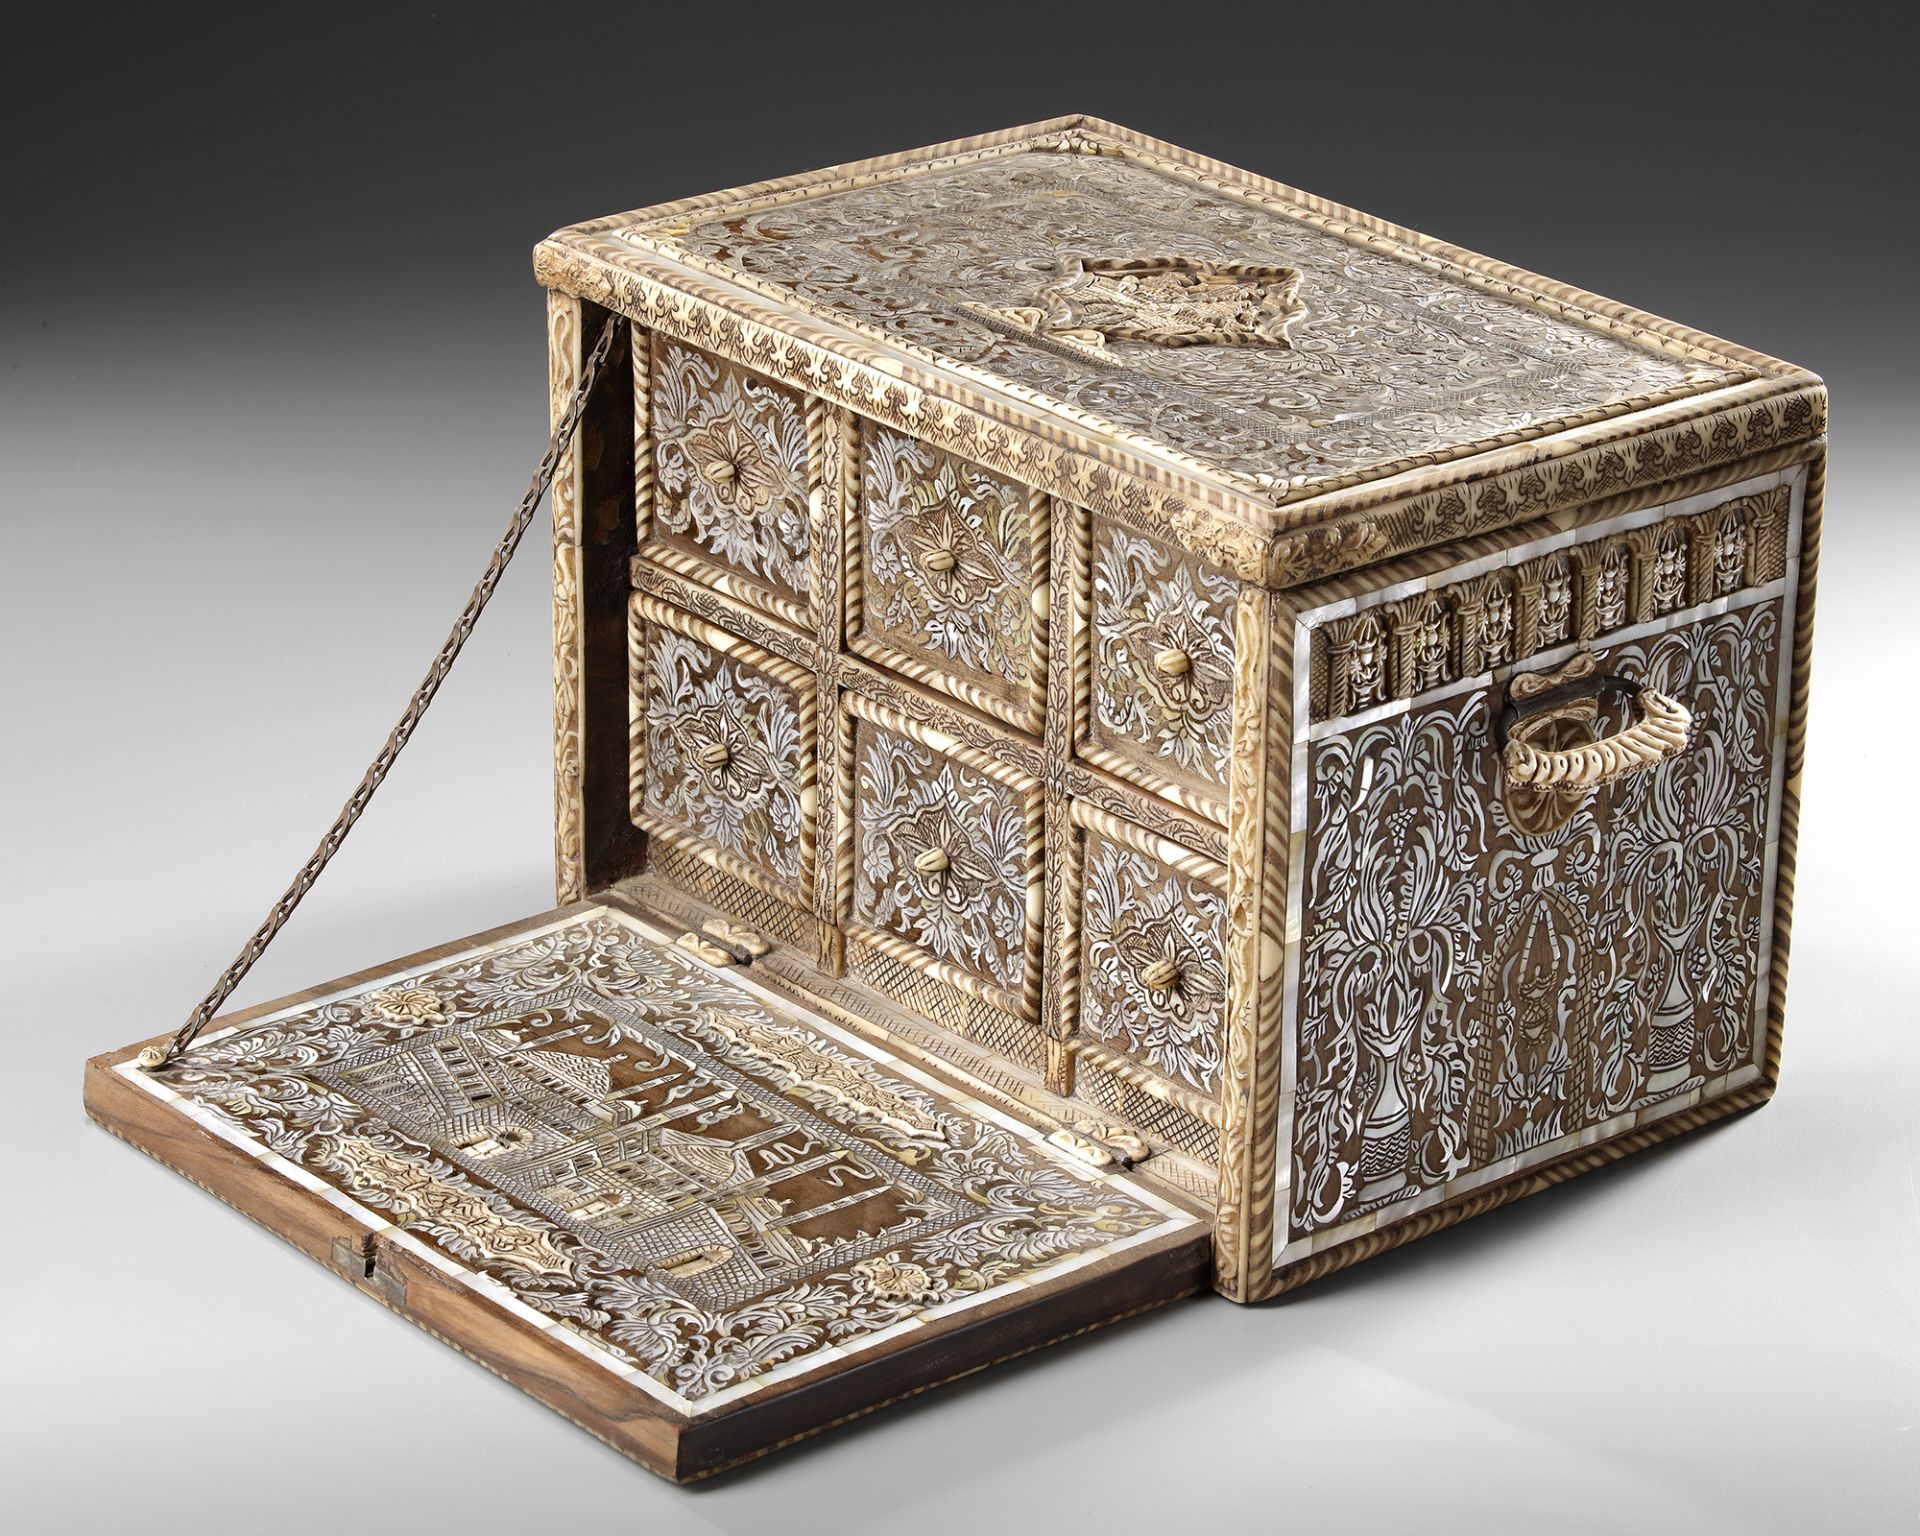 AN OTTOMAN MOTHER-OF-PEARL AND BONE INLAID CABINET, TURKEY OR SYRIA, 18TH-19TH CENTURY - Image 4 of 6